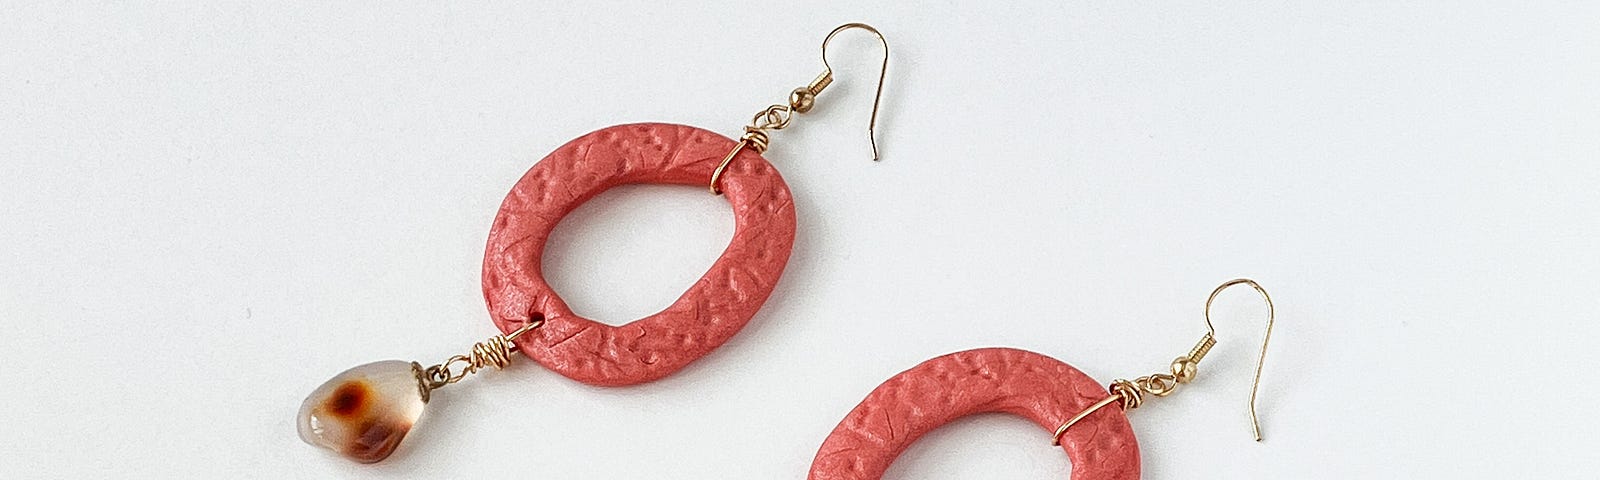 Pink polymer clay hoop earrings with carmine stones on a white background